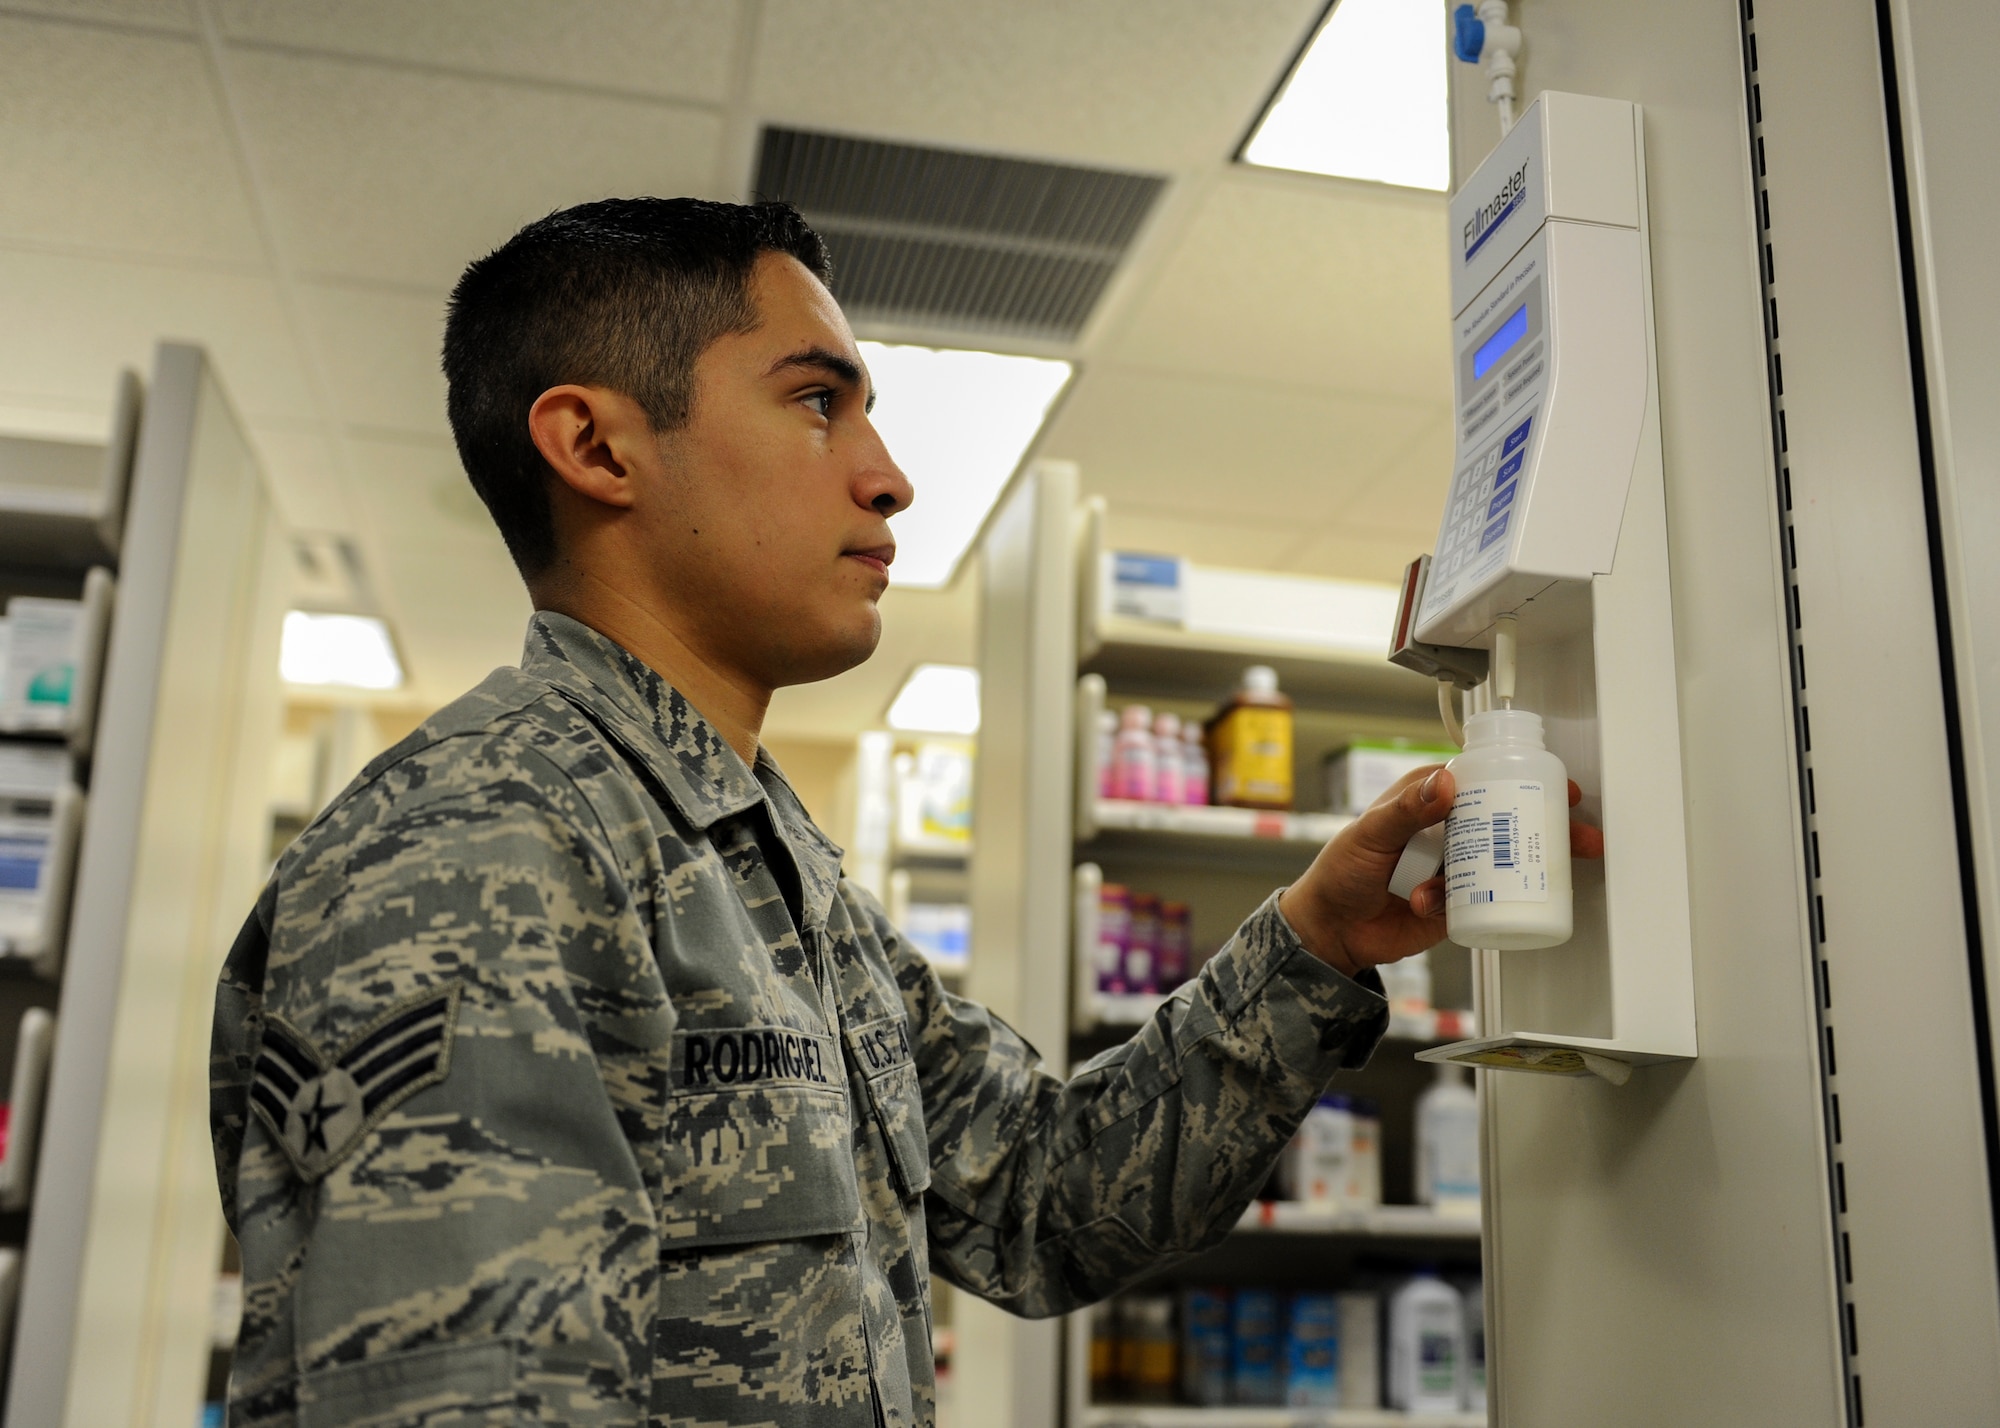 Senior Airman Armando Rodriguez, a 19th Medical Group pharmacy technician, fills a prescription by adding water to a powdered medication Feb. 24, 2014, at Little Rock Air Force Base, Ark. Prescription medications come in many varieties such as powder and must be prepared before giving it to the customer. (U.S. Air Force photo by Staff Sgt. Jessica Condit)